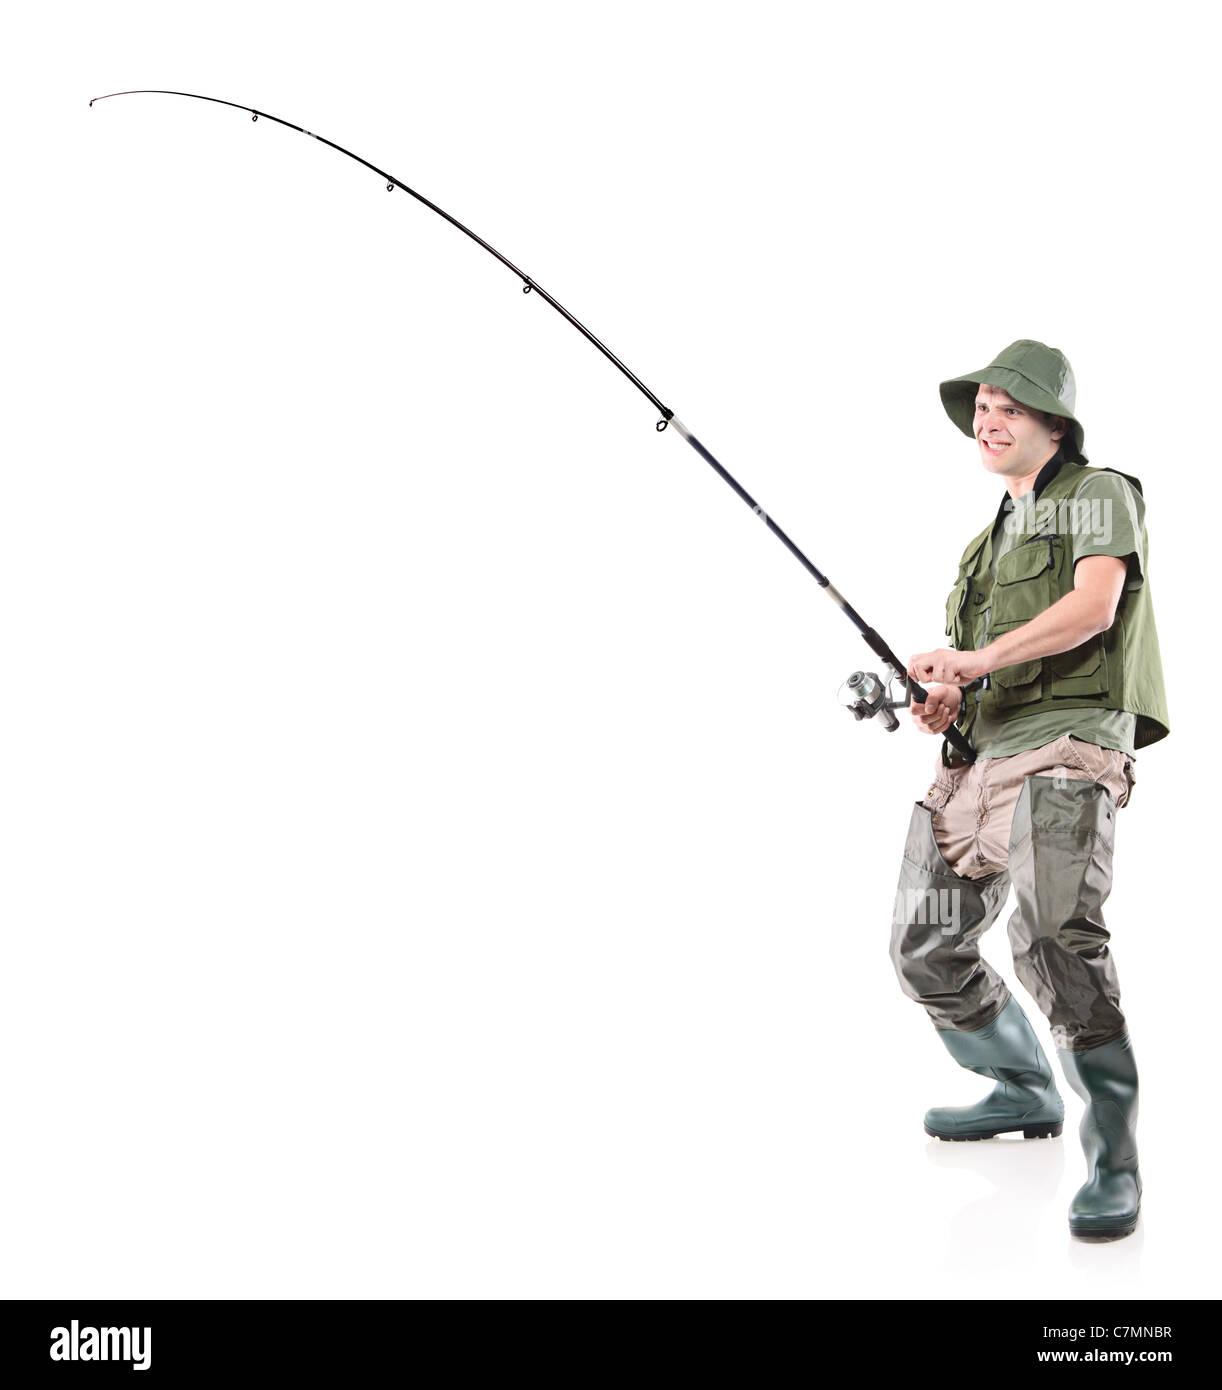 Full length portrait of a fisherman holding a fishing pole Stock